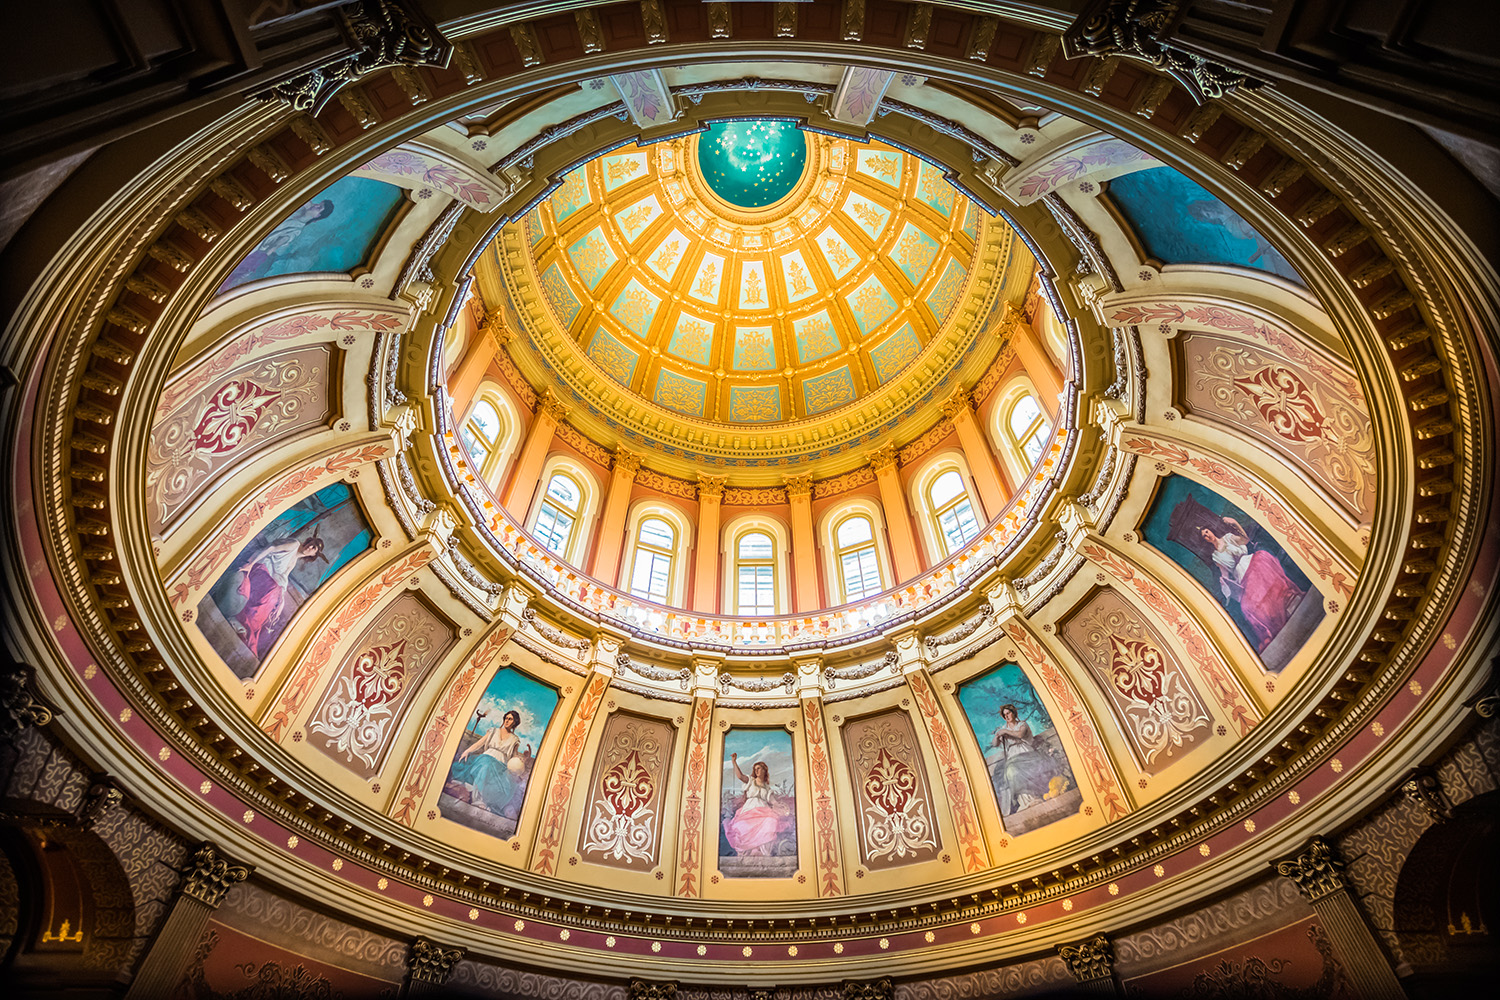 The dome inside the Michigan state capital building